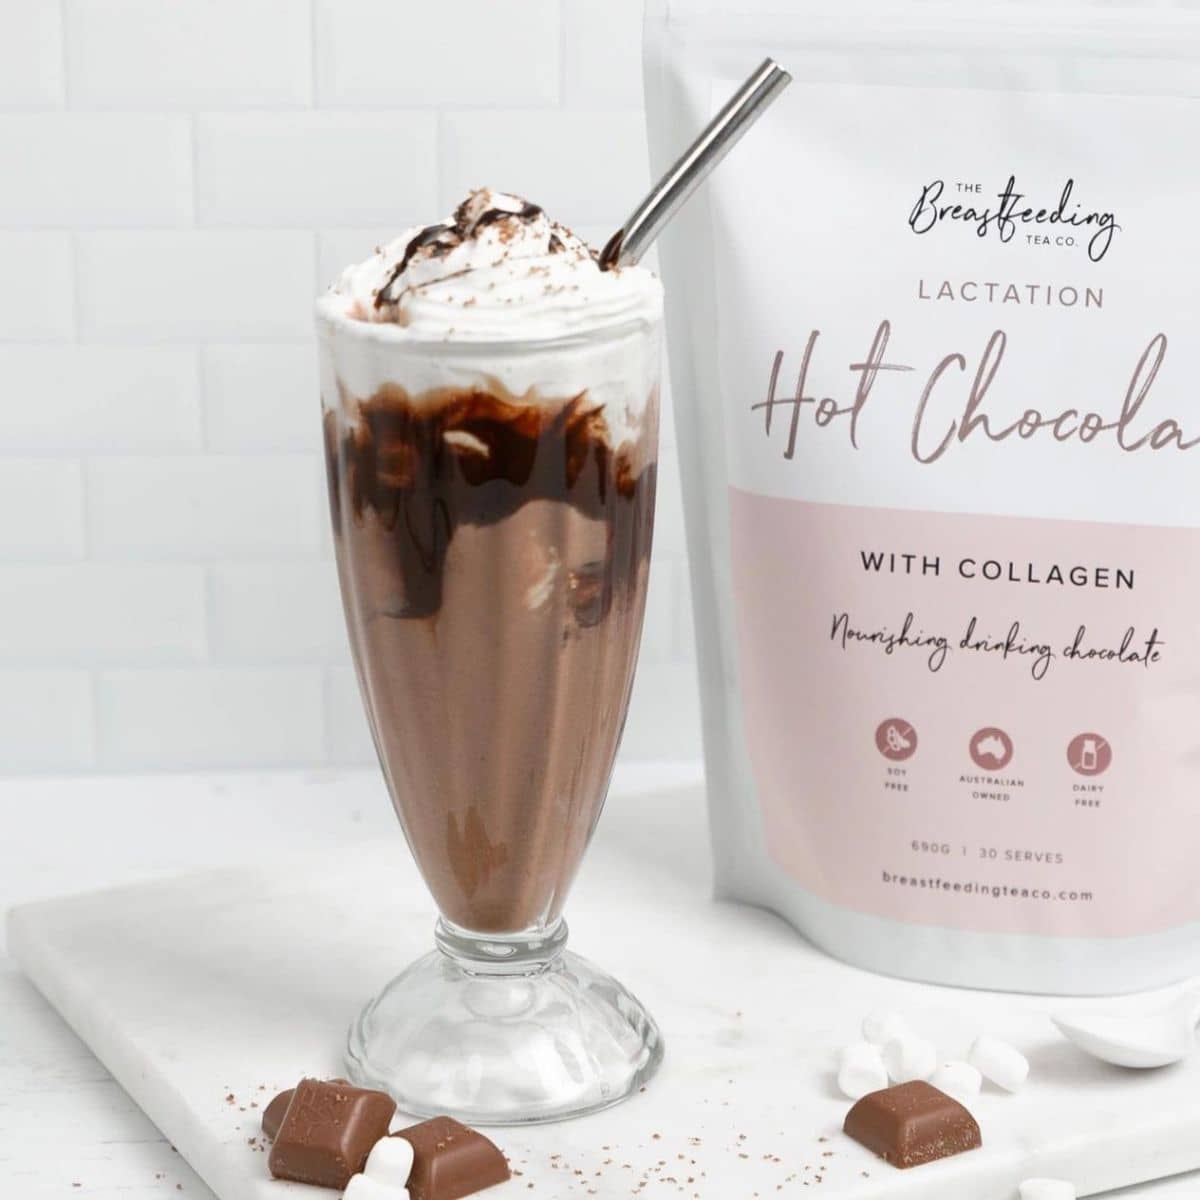 The Breastfeeding Tea Co - Lactation Hot Chocolate with Collagen